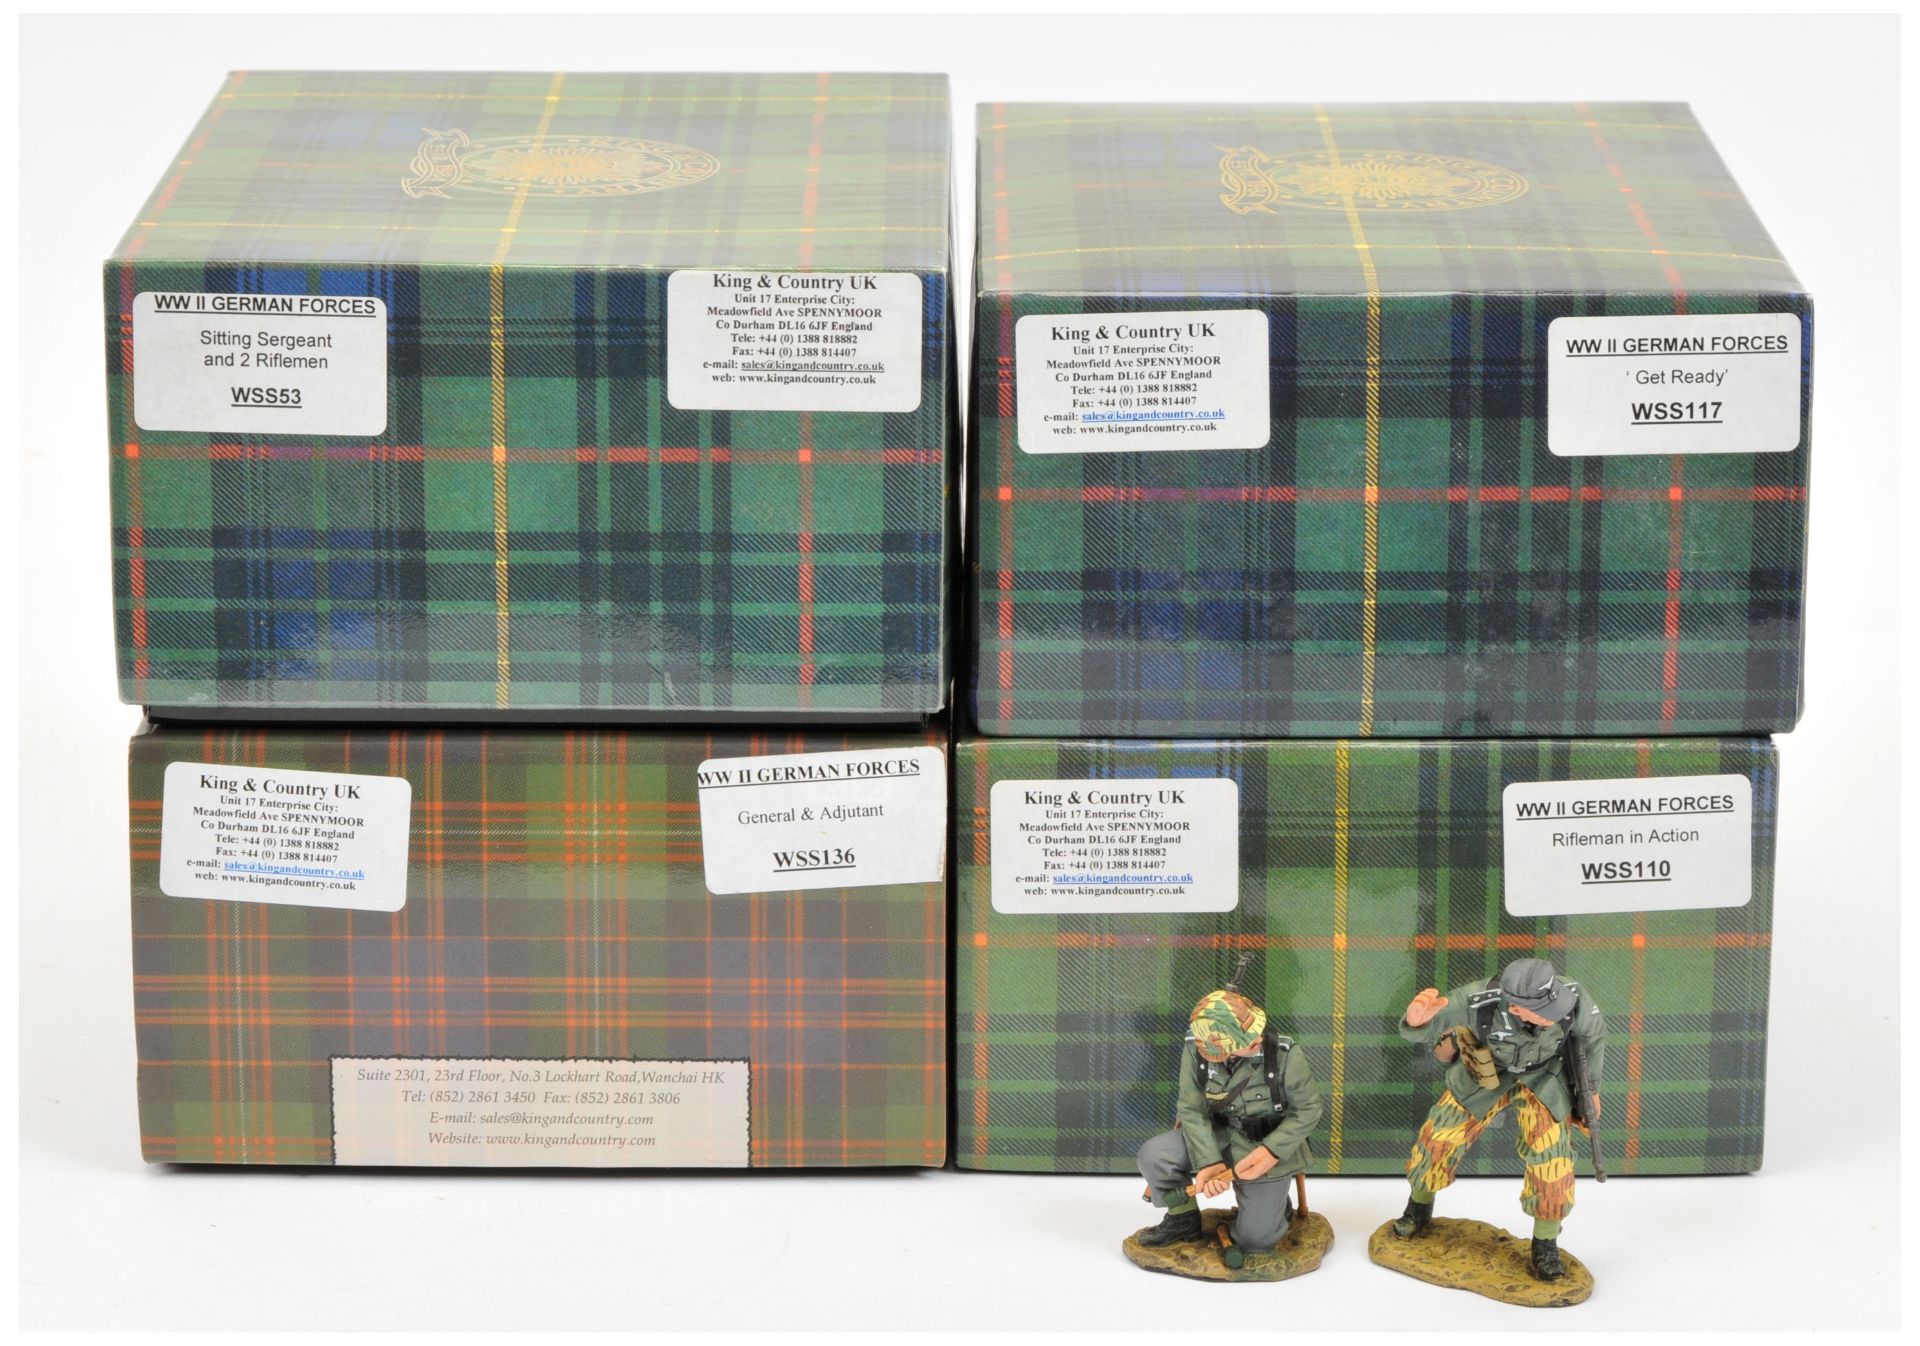 King & Country - 'WW II German Forces' Series, including Set Nos. WSS136 'General & Adjutant'